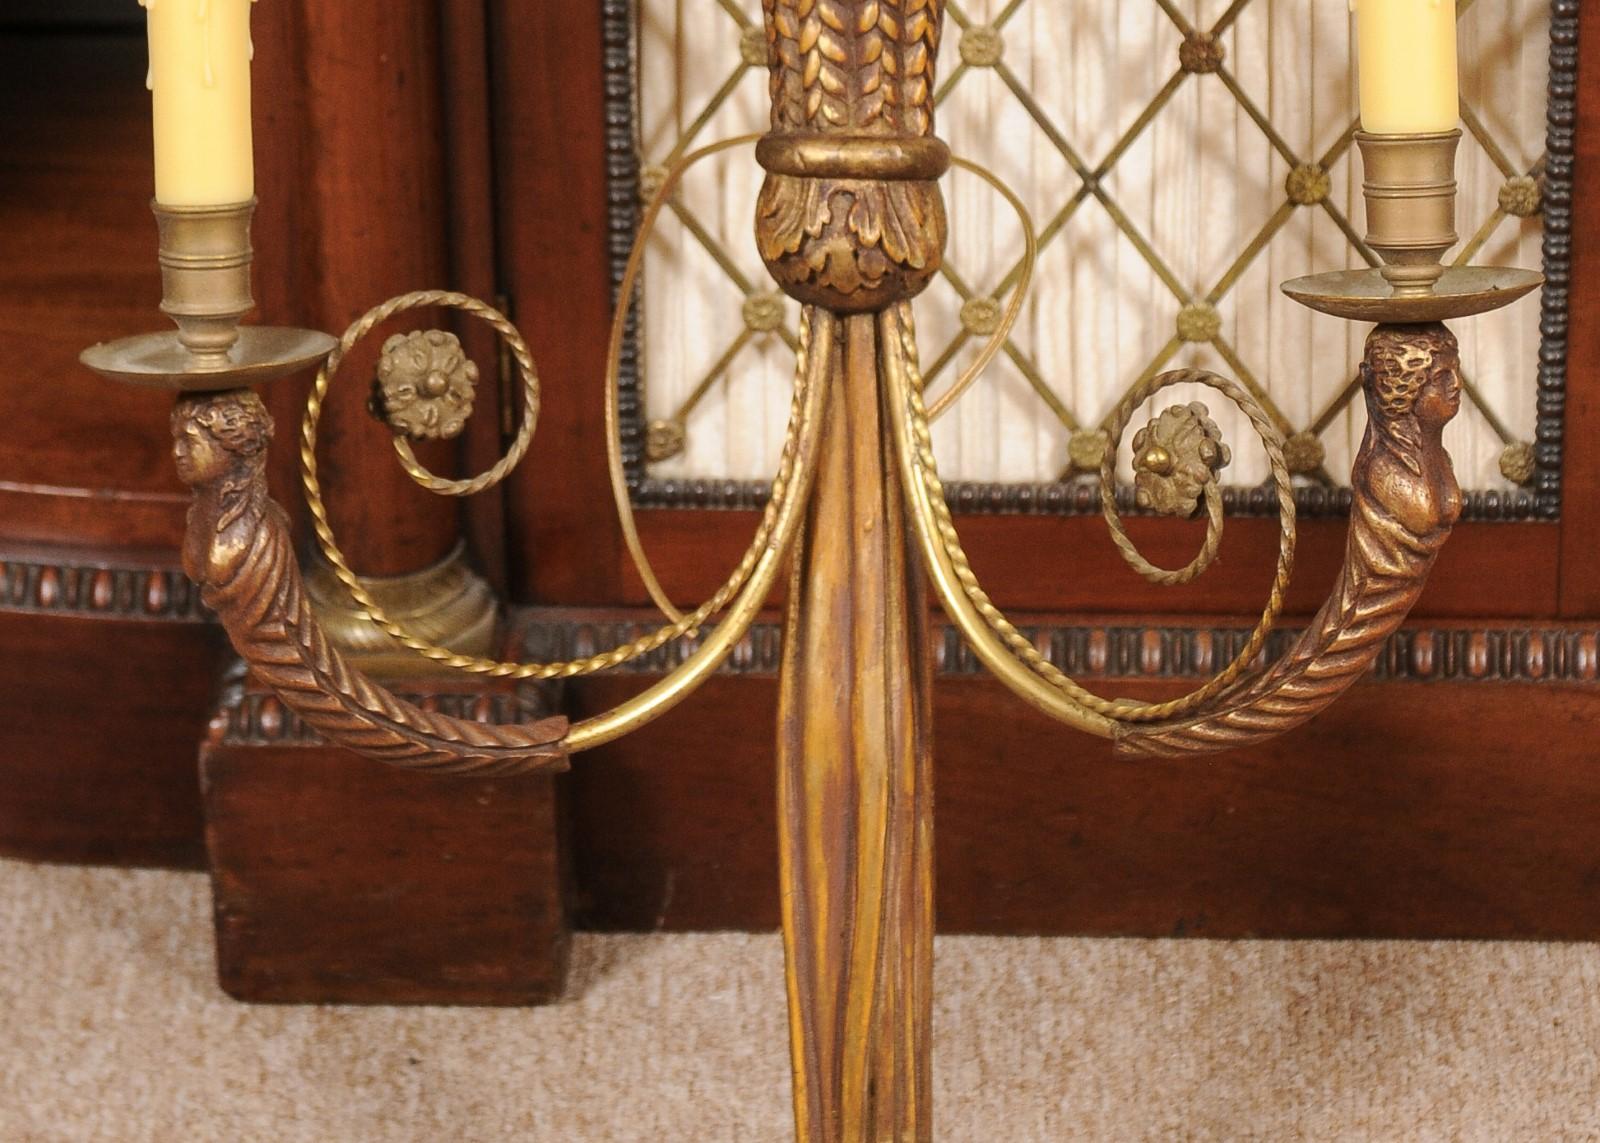  Pair of Giltwood Carved Eagle 2 Light Sconces with Tassle Detail, 20th Century For Sale 2